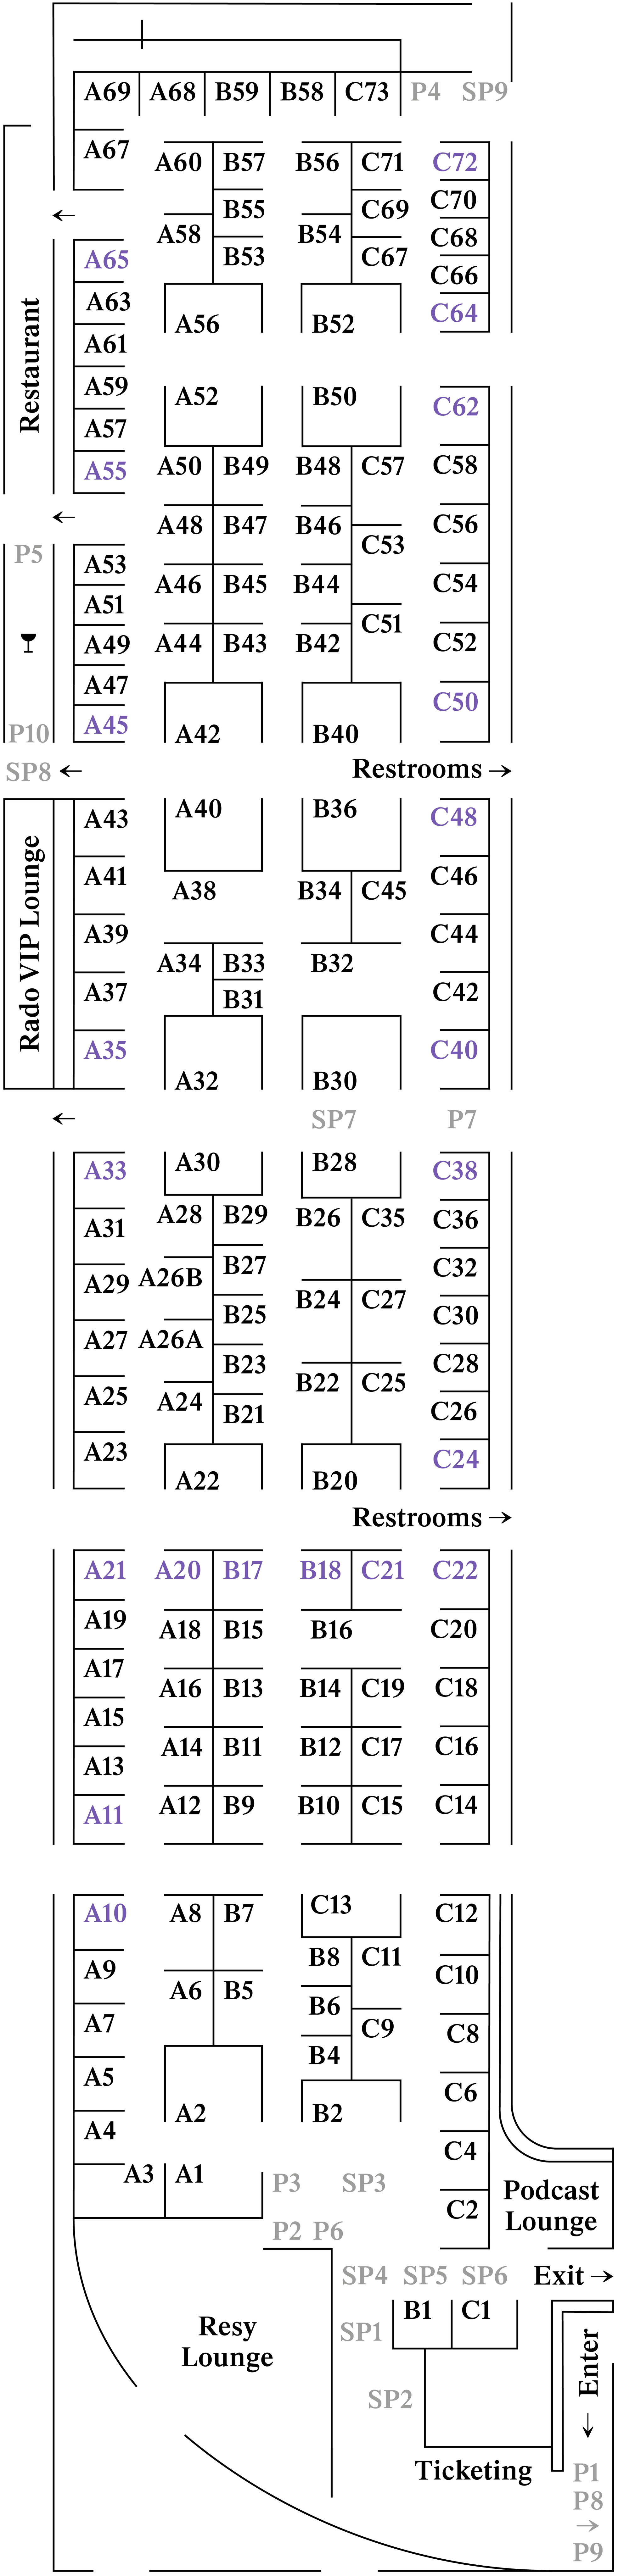 image of a map of the Untitled Art Fair outlining where each booth is